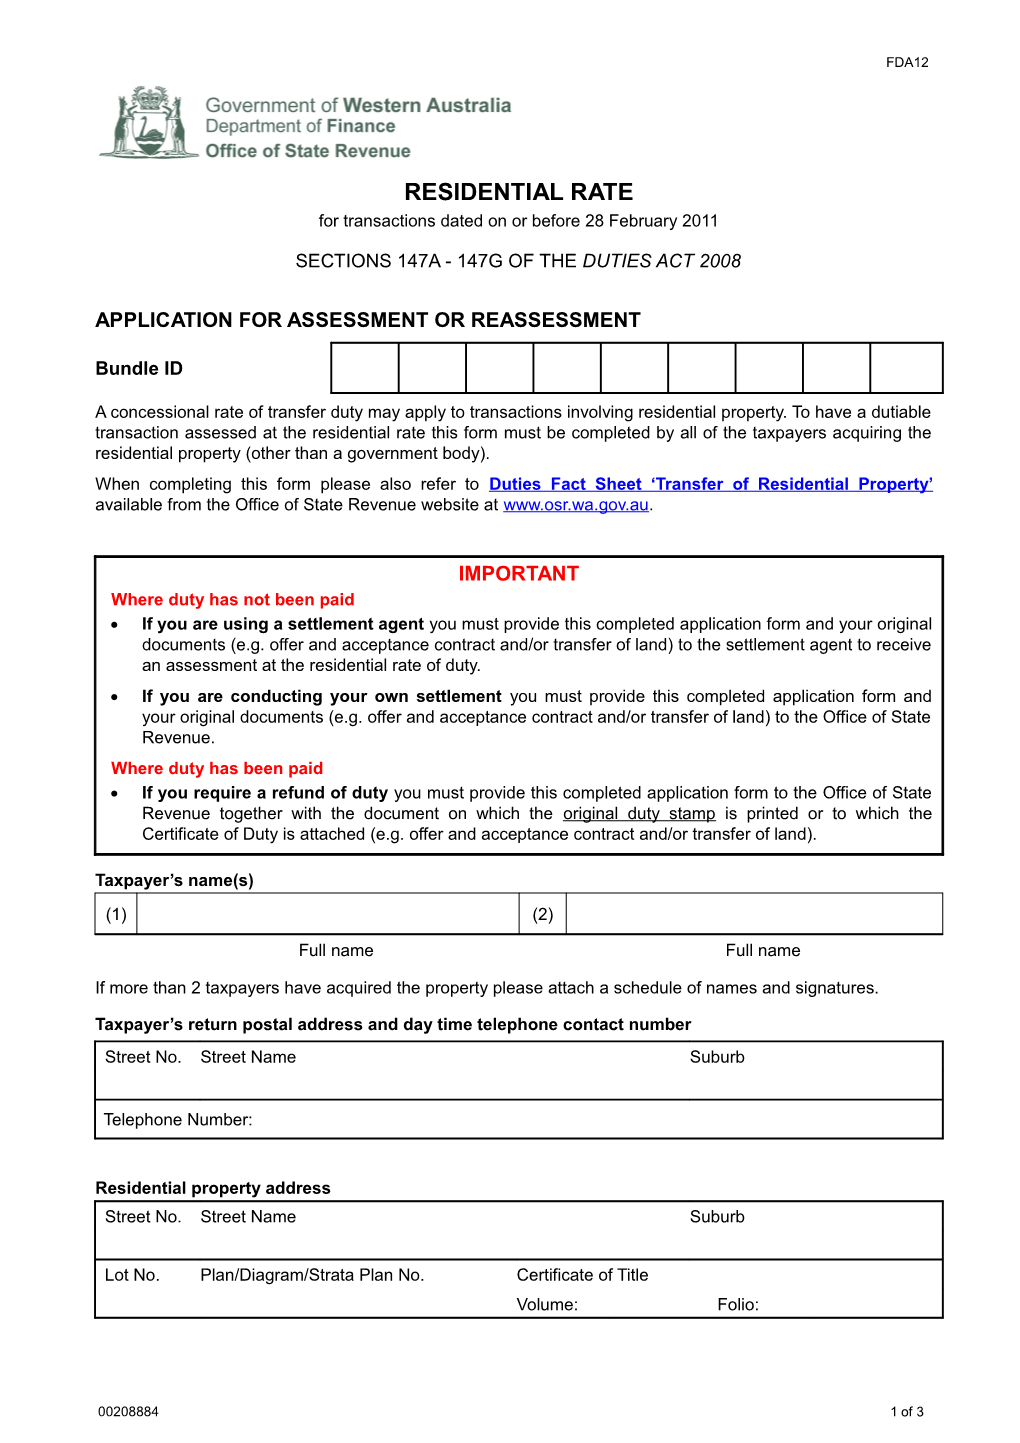 Residential Rate Form